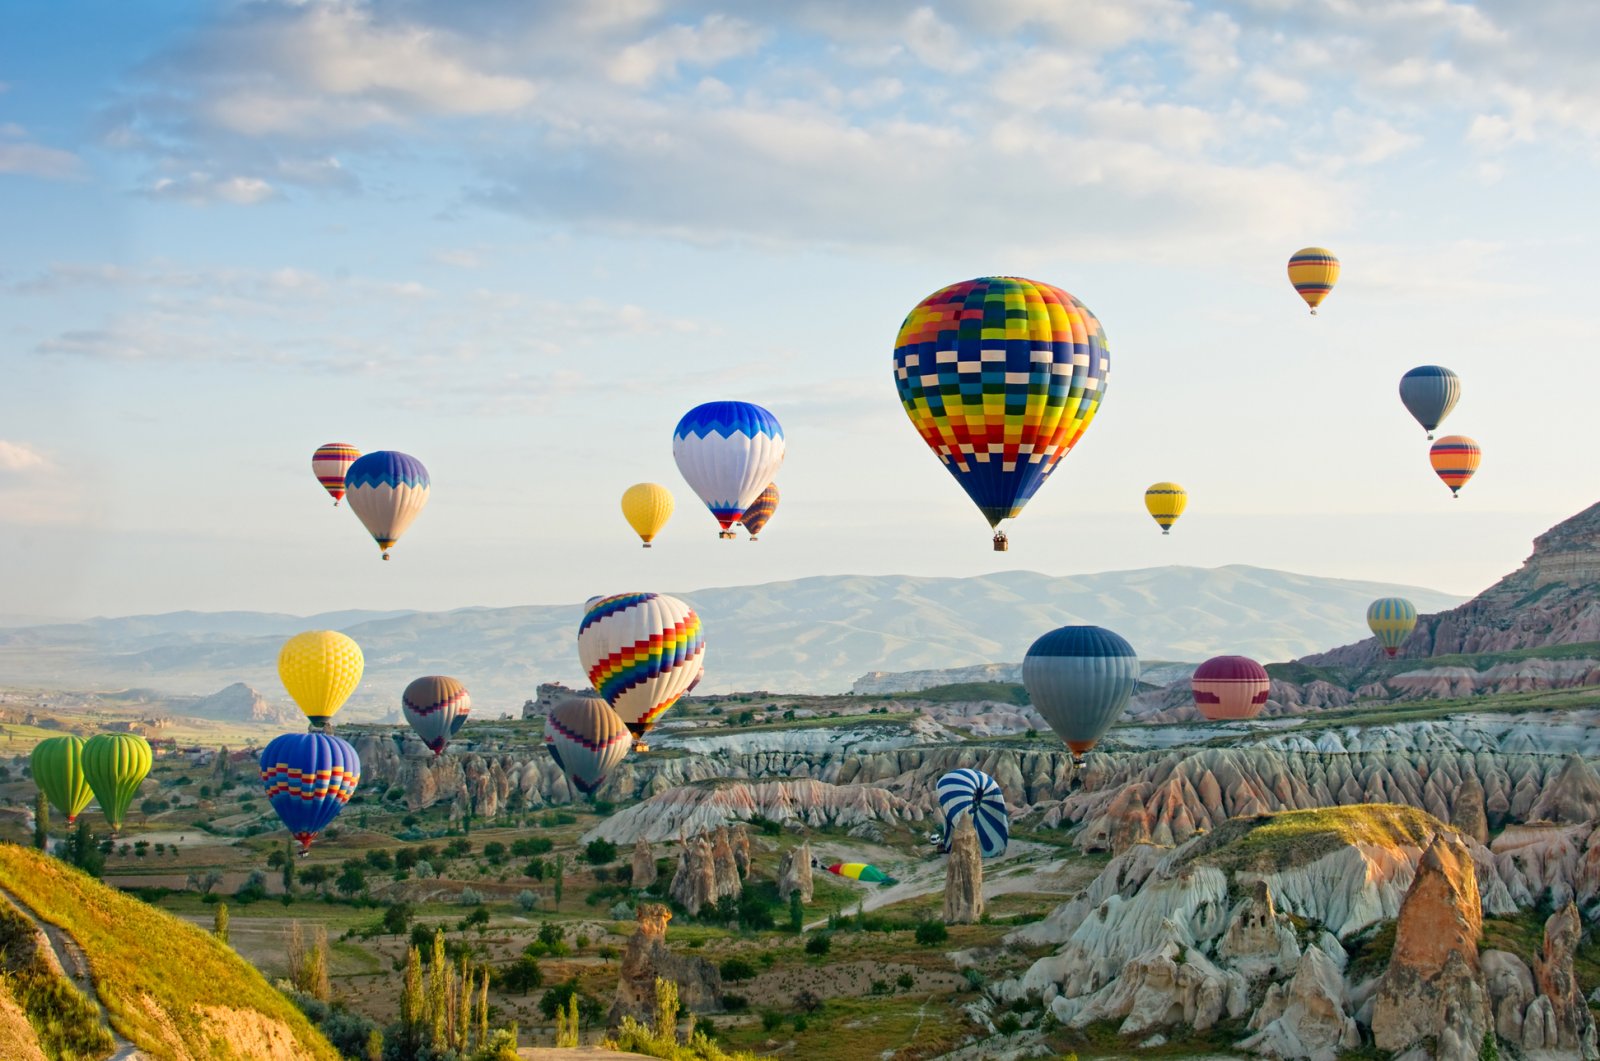  Cappadocia is one of the top tourist destinations in Turkey. 